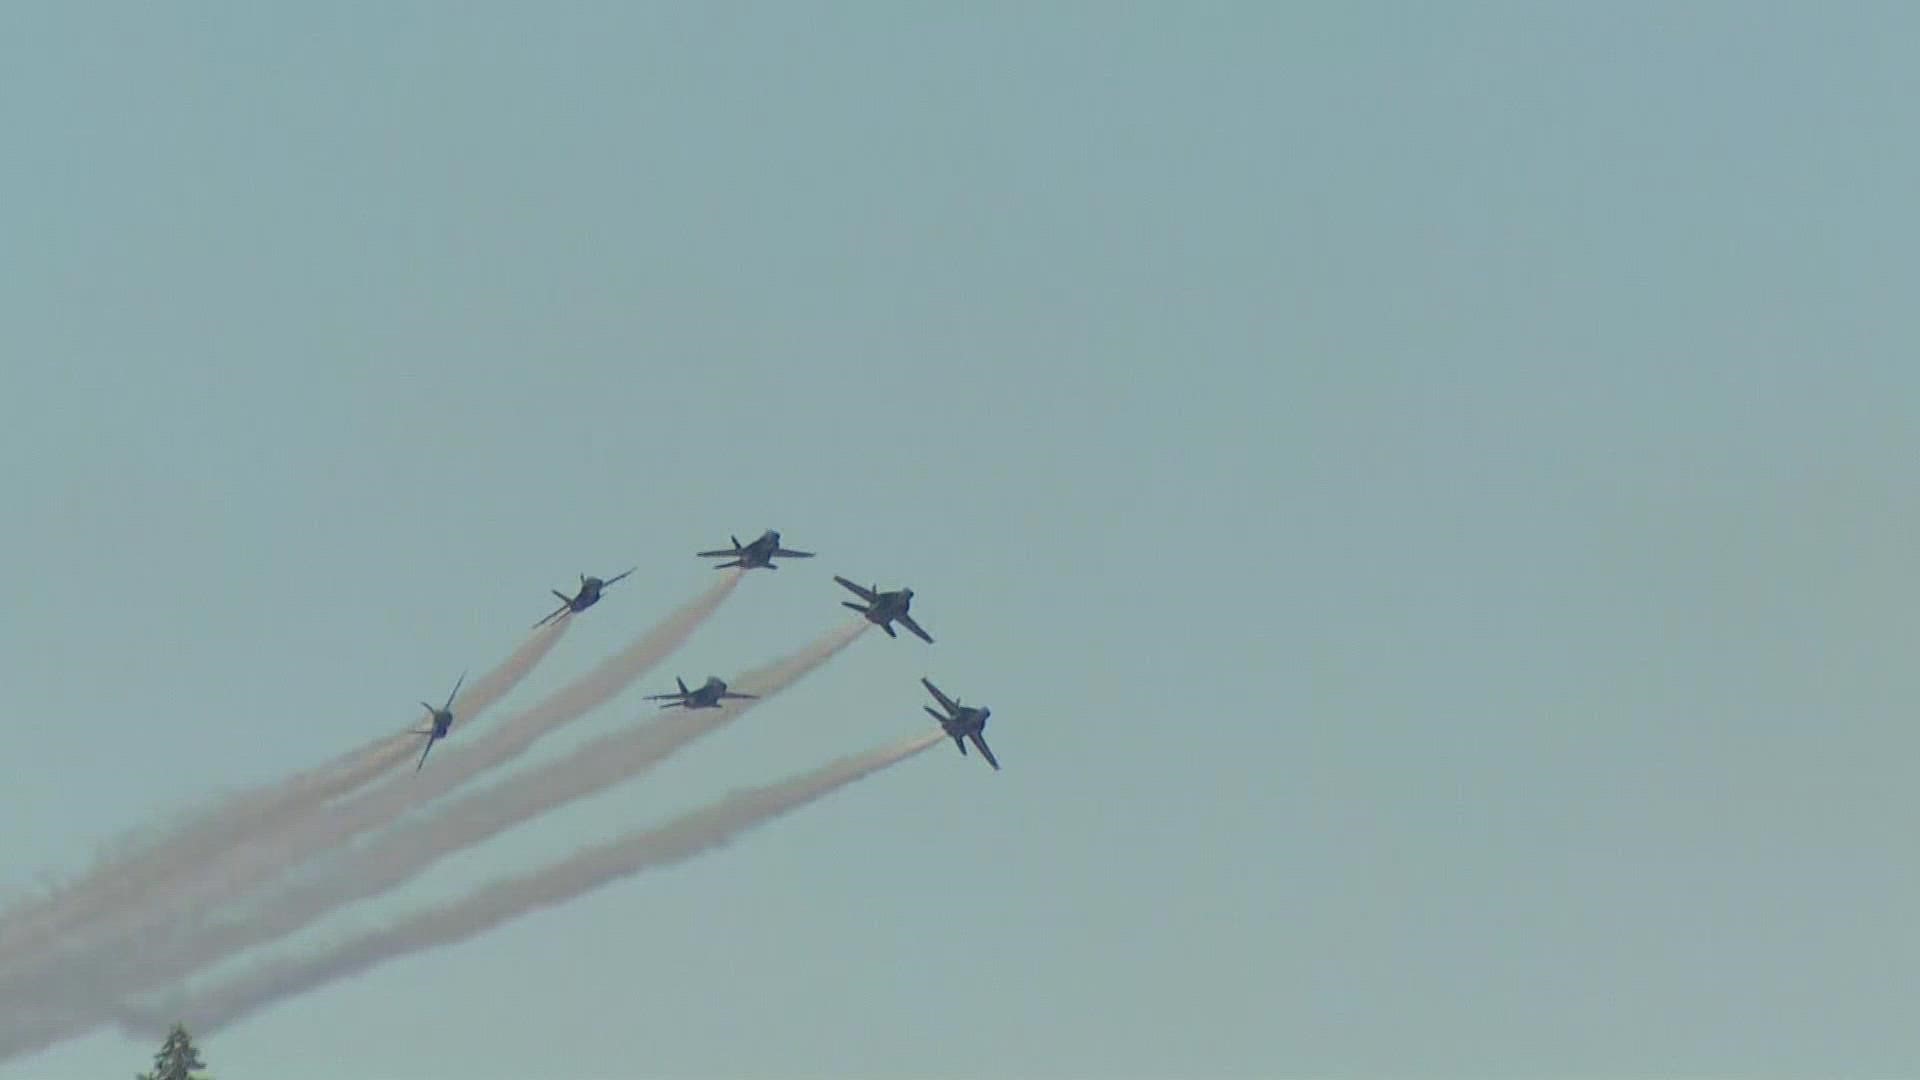 The US Navy Blue Angels performed Friday in Seattle and have more performances this weekend for Seafair.